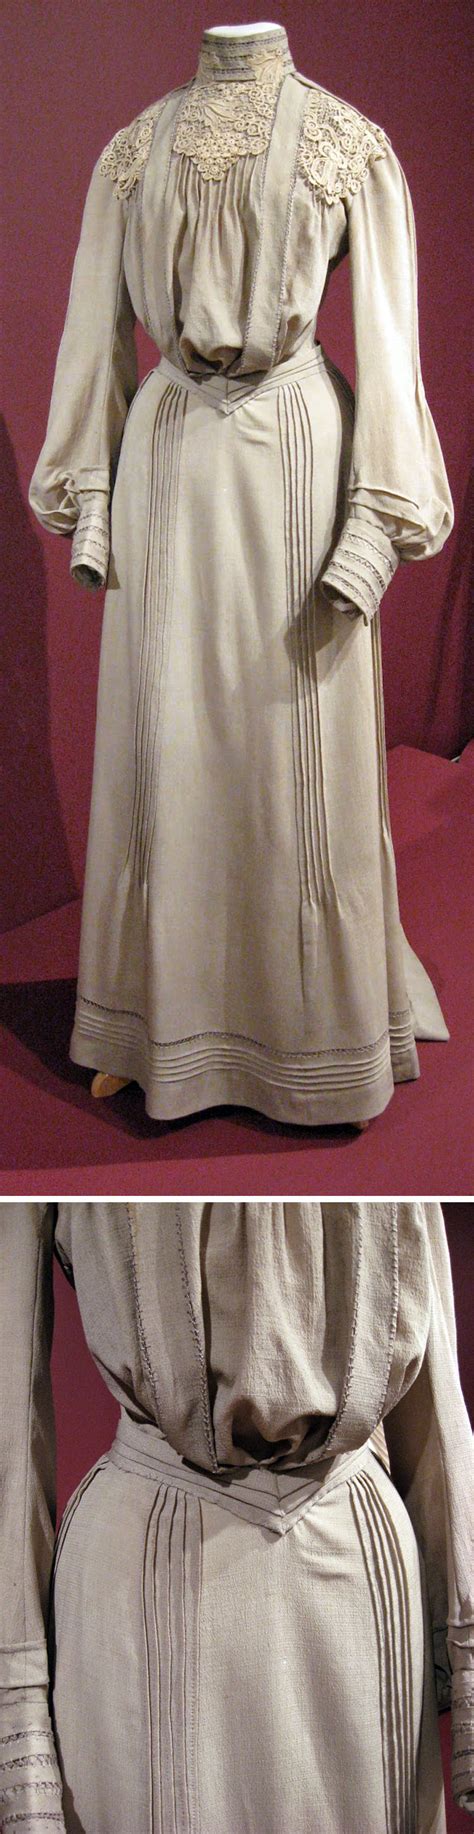 Day Dress American Ca 1902 Putty Colored Wool Trimmed With Lace And